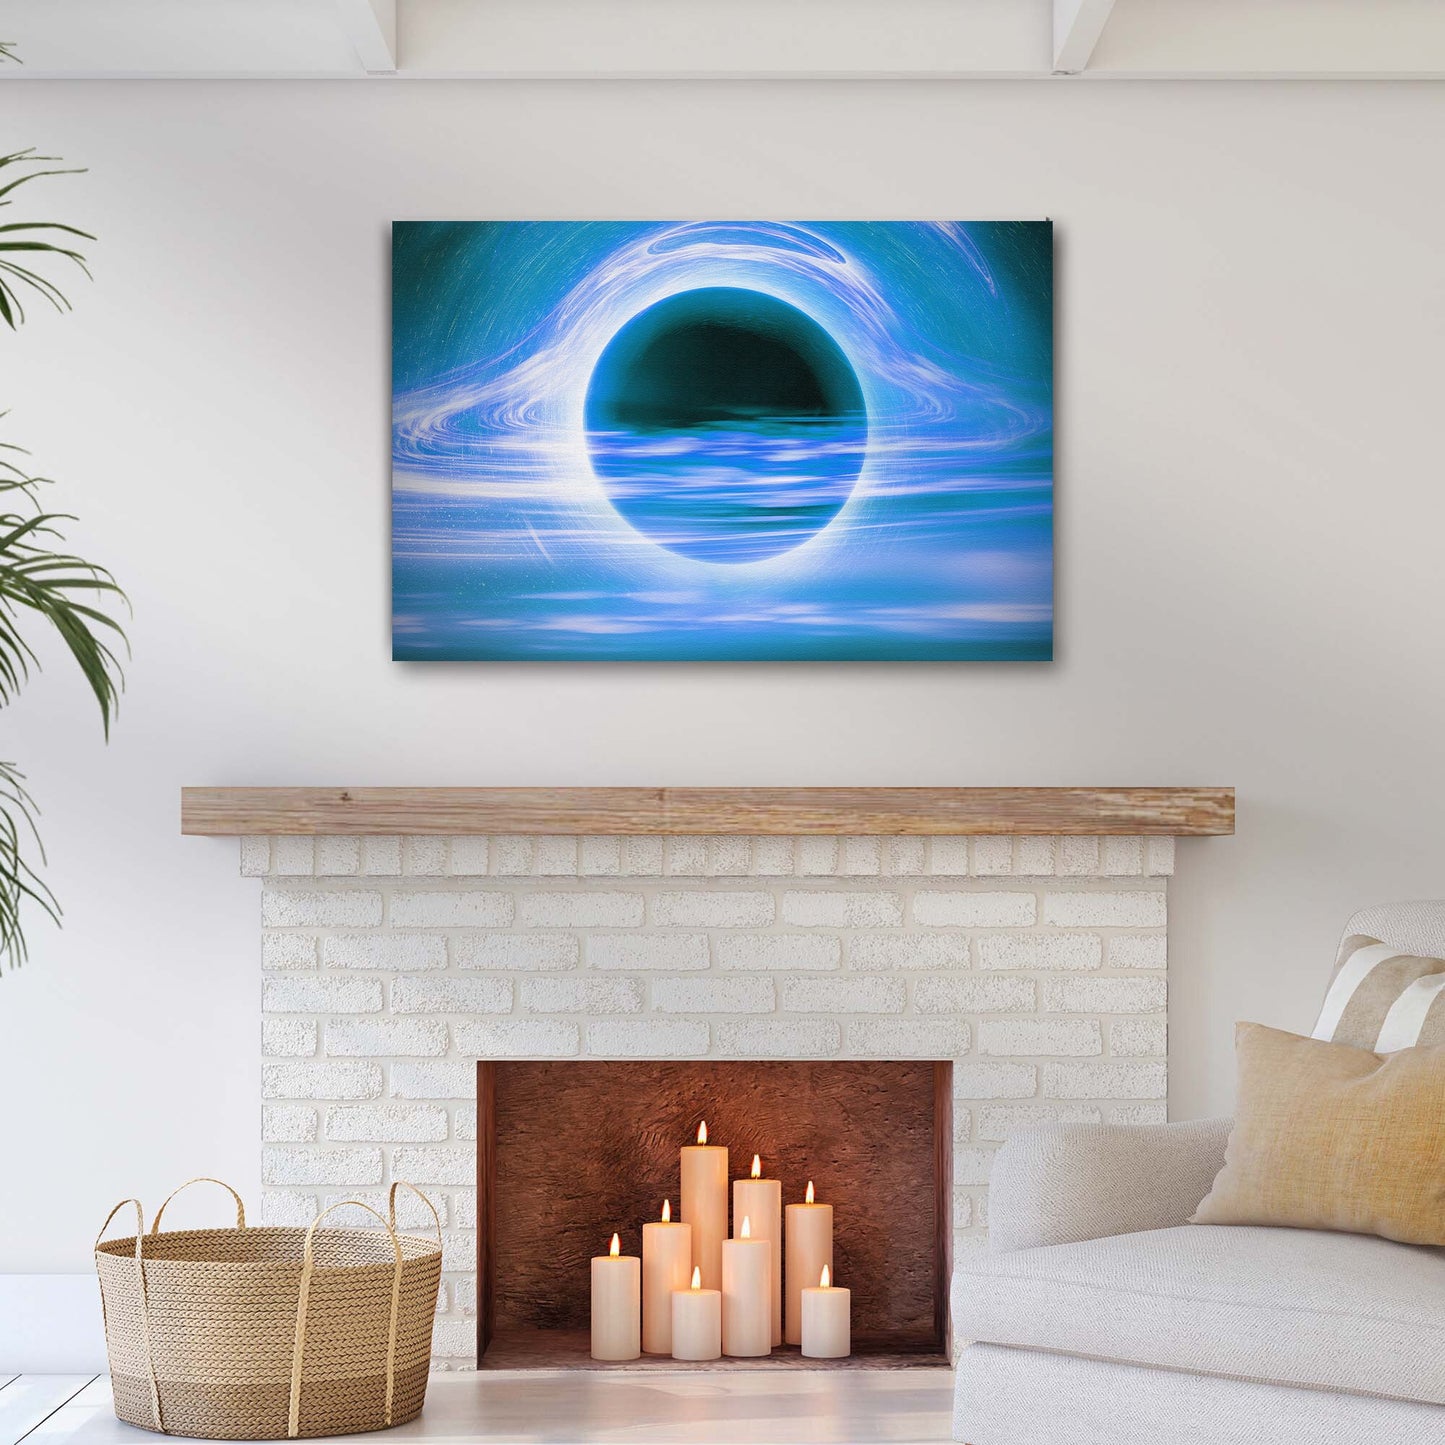 Cosmos Exploration  Black Hole in the Cosmos Canvas Wall Art